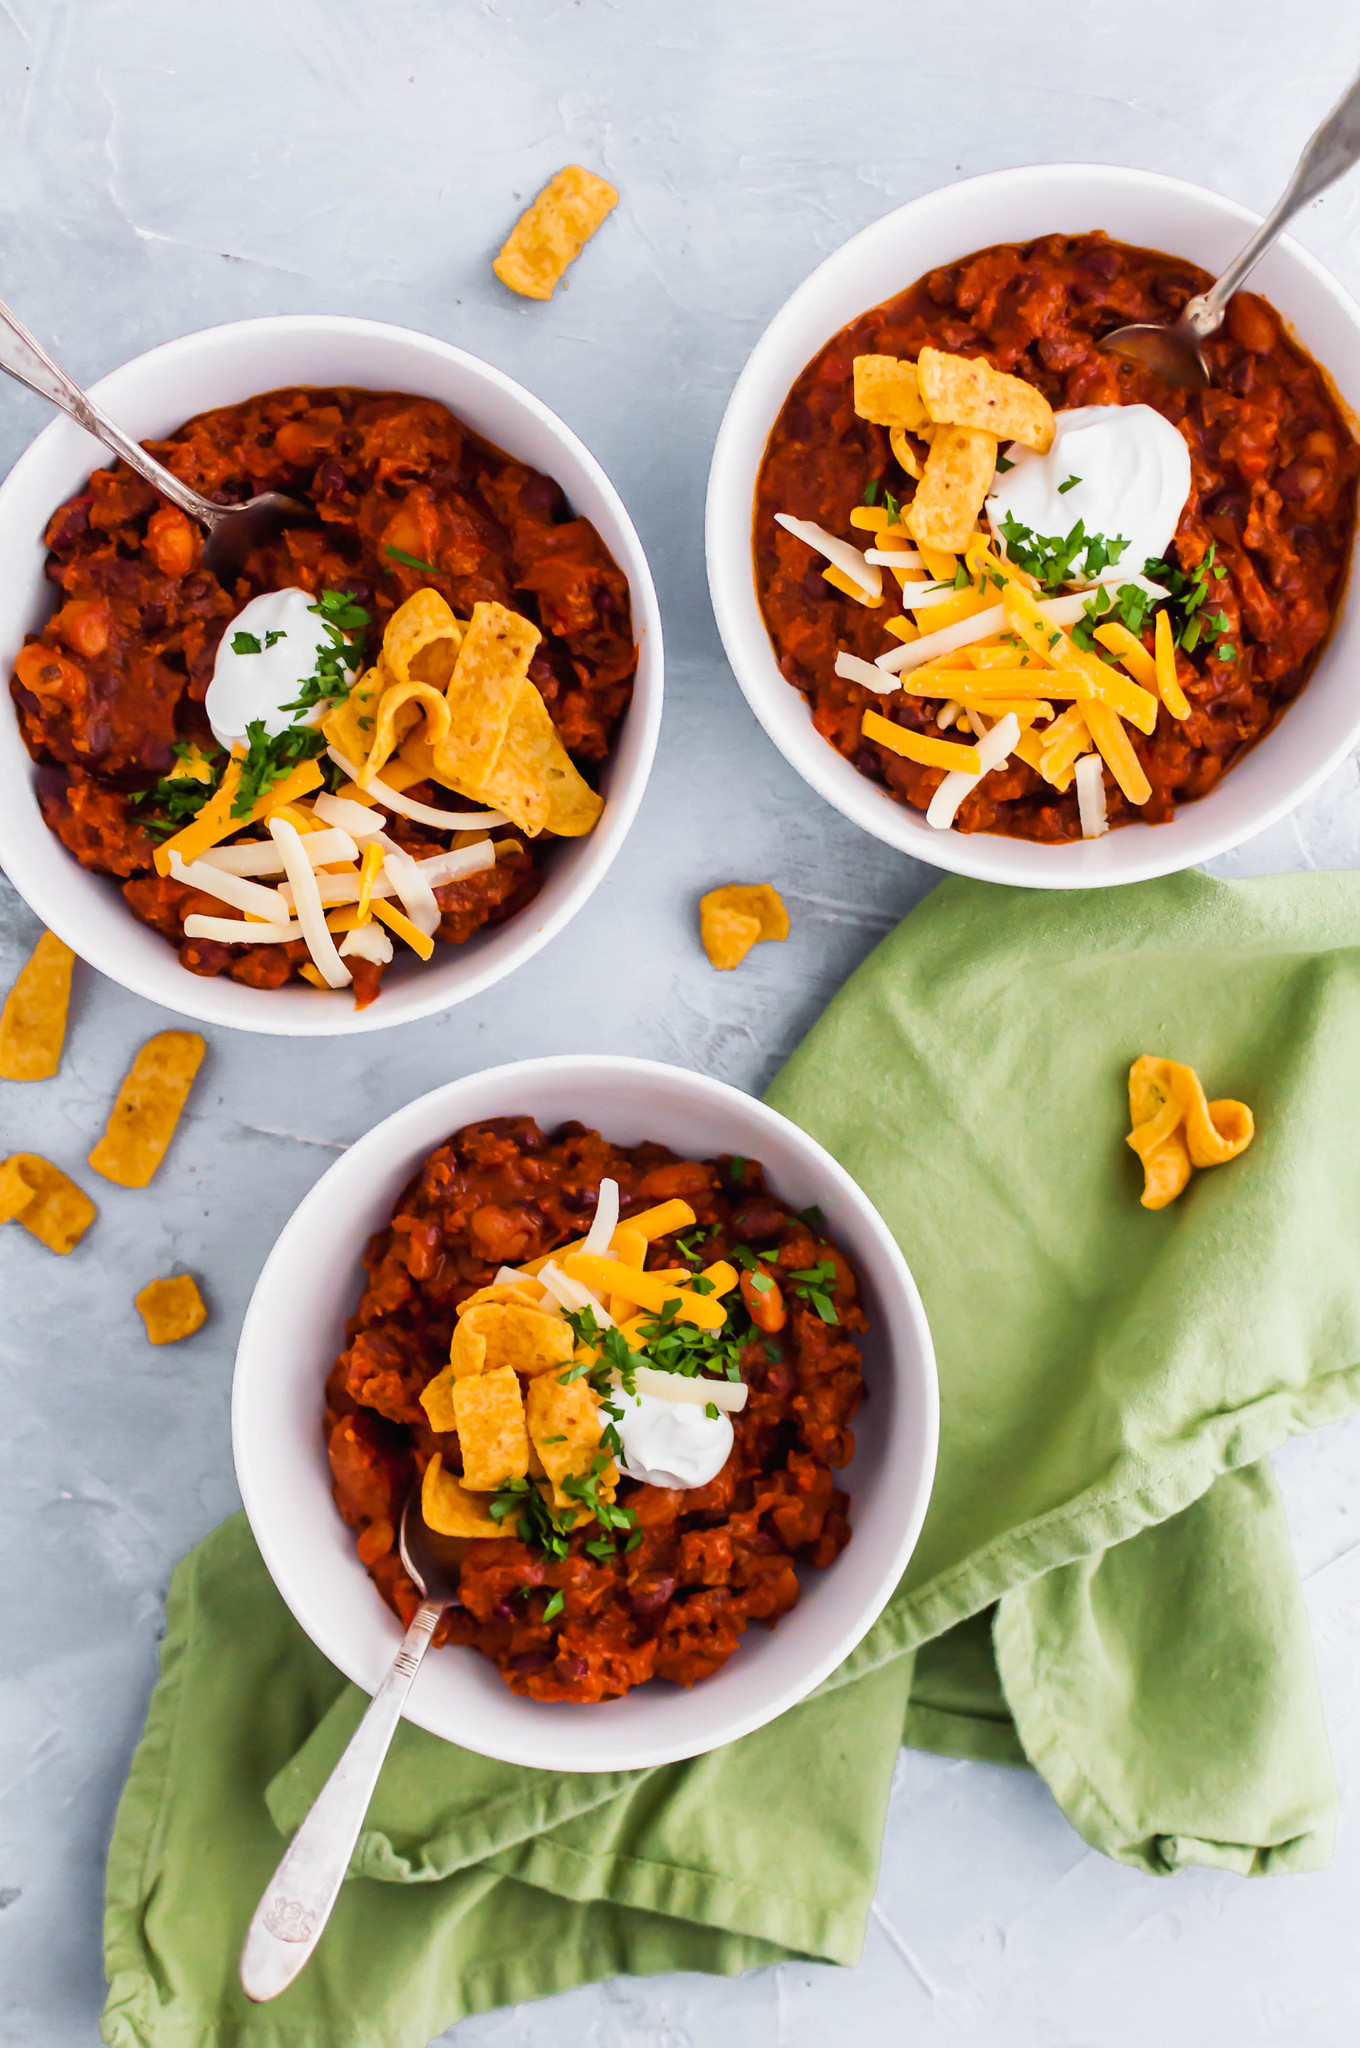 Chili season is upon us and this Chipotle Chili is my favorite. It's the perfect amount of hearty, smoky and spicy all in one bowl.